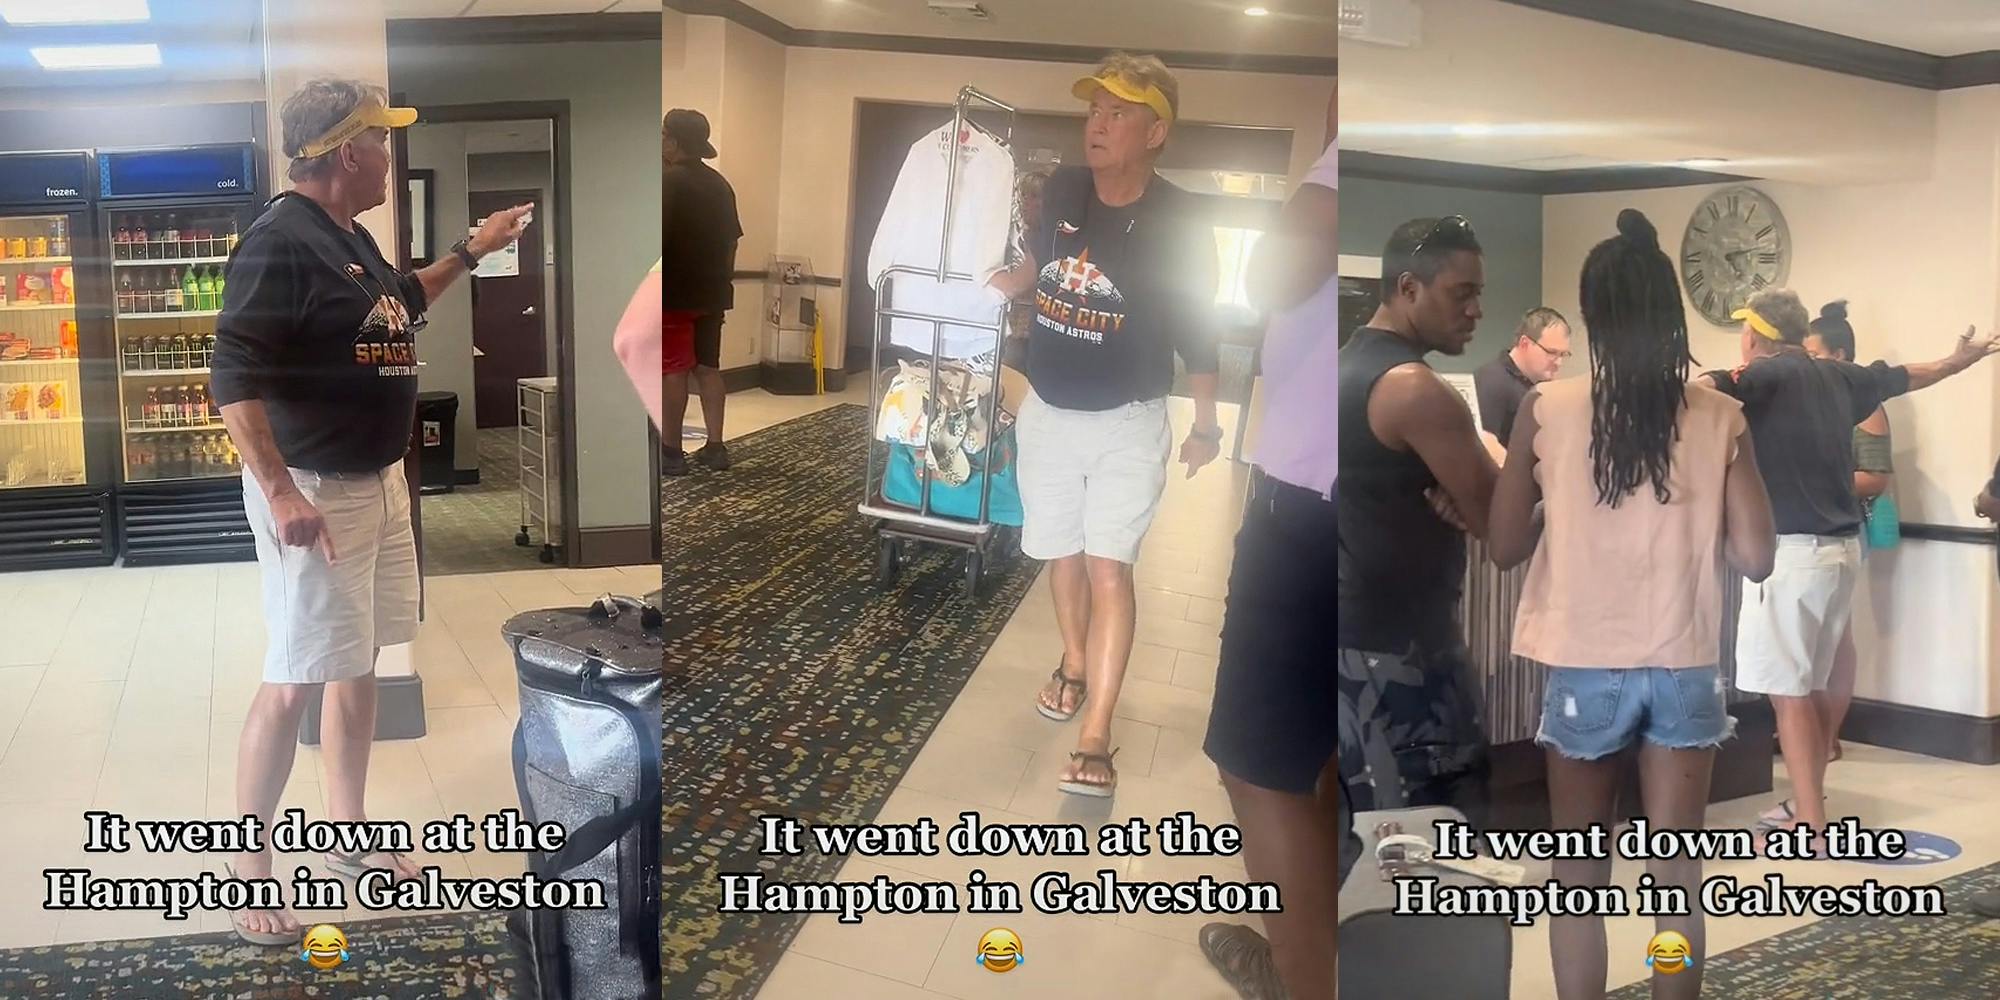 man in Hampton hotel lobby pointing finger yelling caption 'It went down at the Hampton in Galveston' (l) man walking with clothing rack on wheels down Hampton hotel lobby caption 'It went down at the Hampton in Galveston' (c) man at Hampton hotel lobby check in yelling arms up caption 'It went down at the Hampton in Galveston' (r)